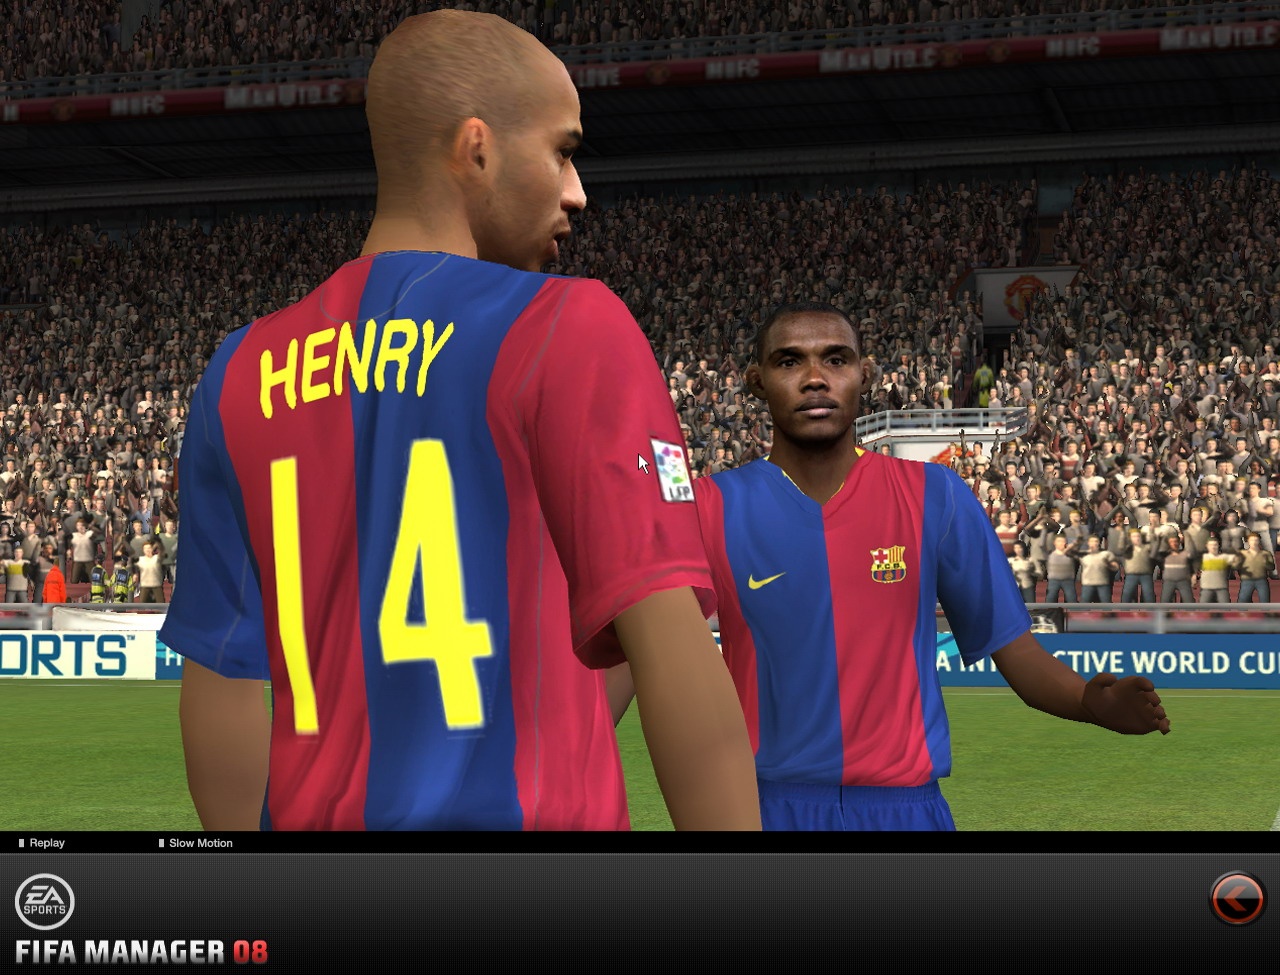 The match engine isn't up to the visual standard of FIFA 08, but player likenesses are impressive.